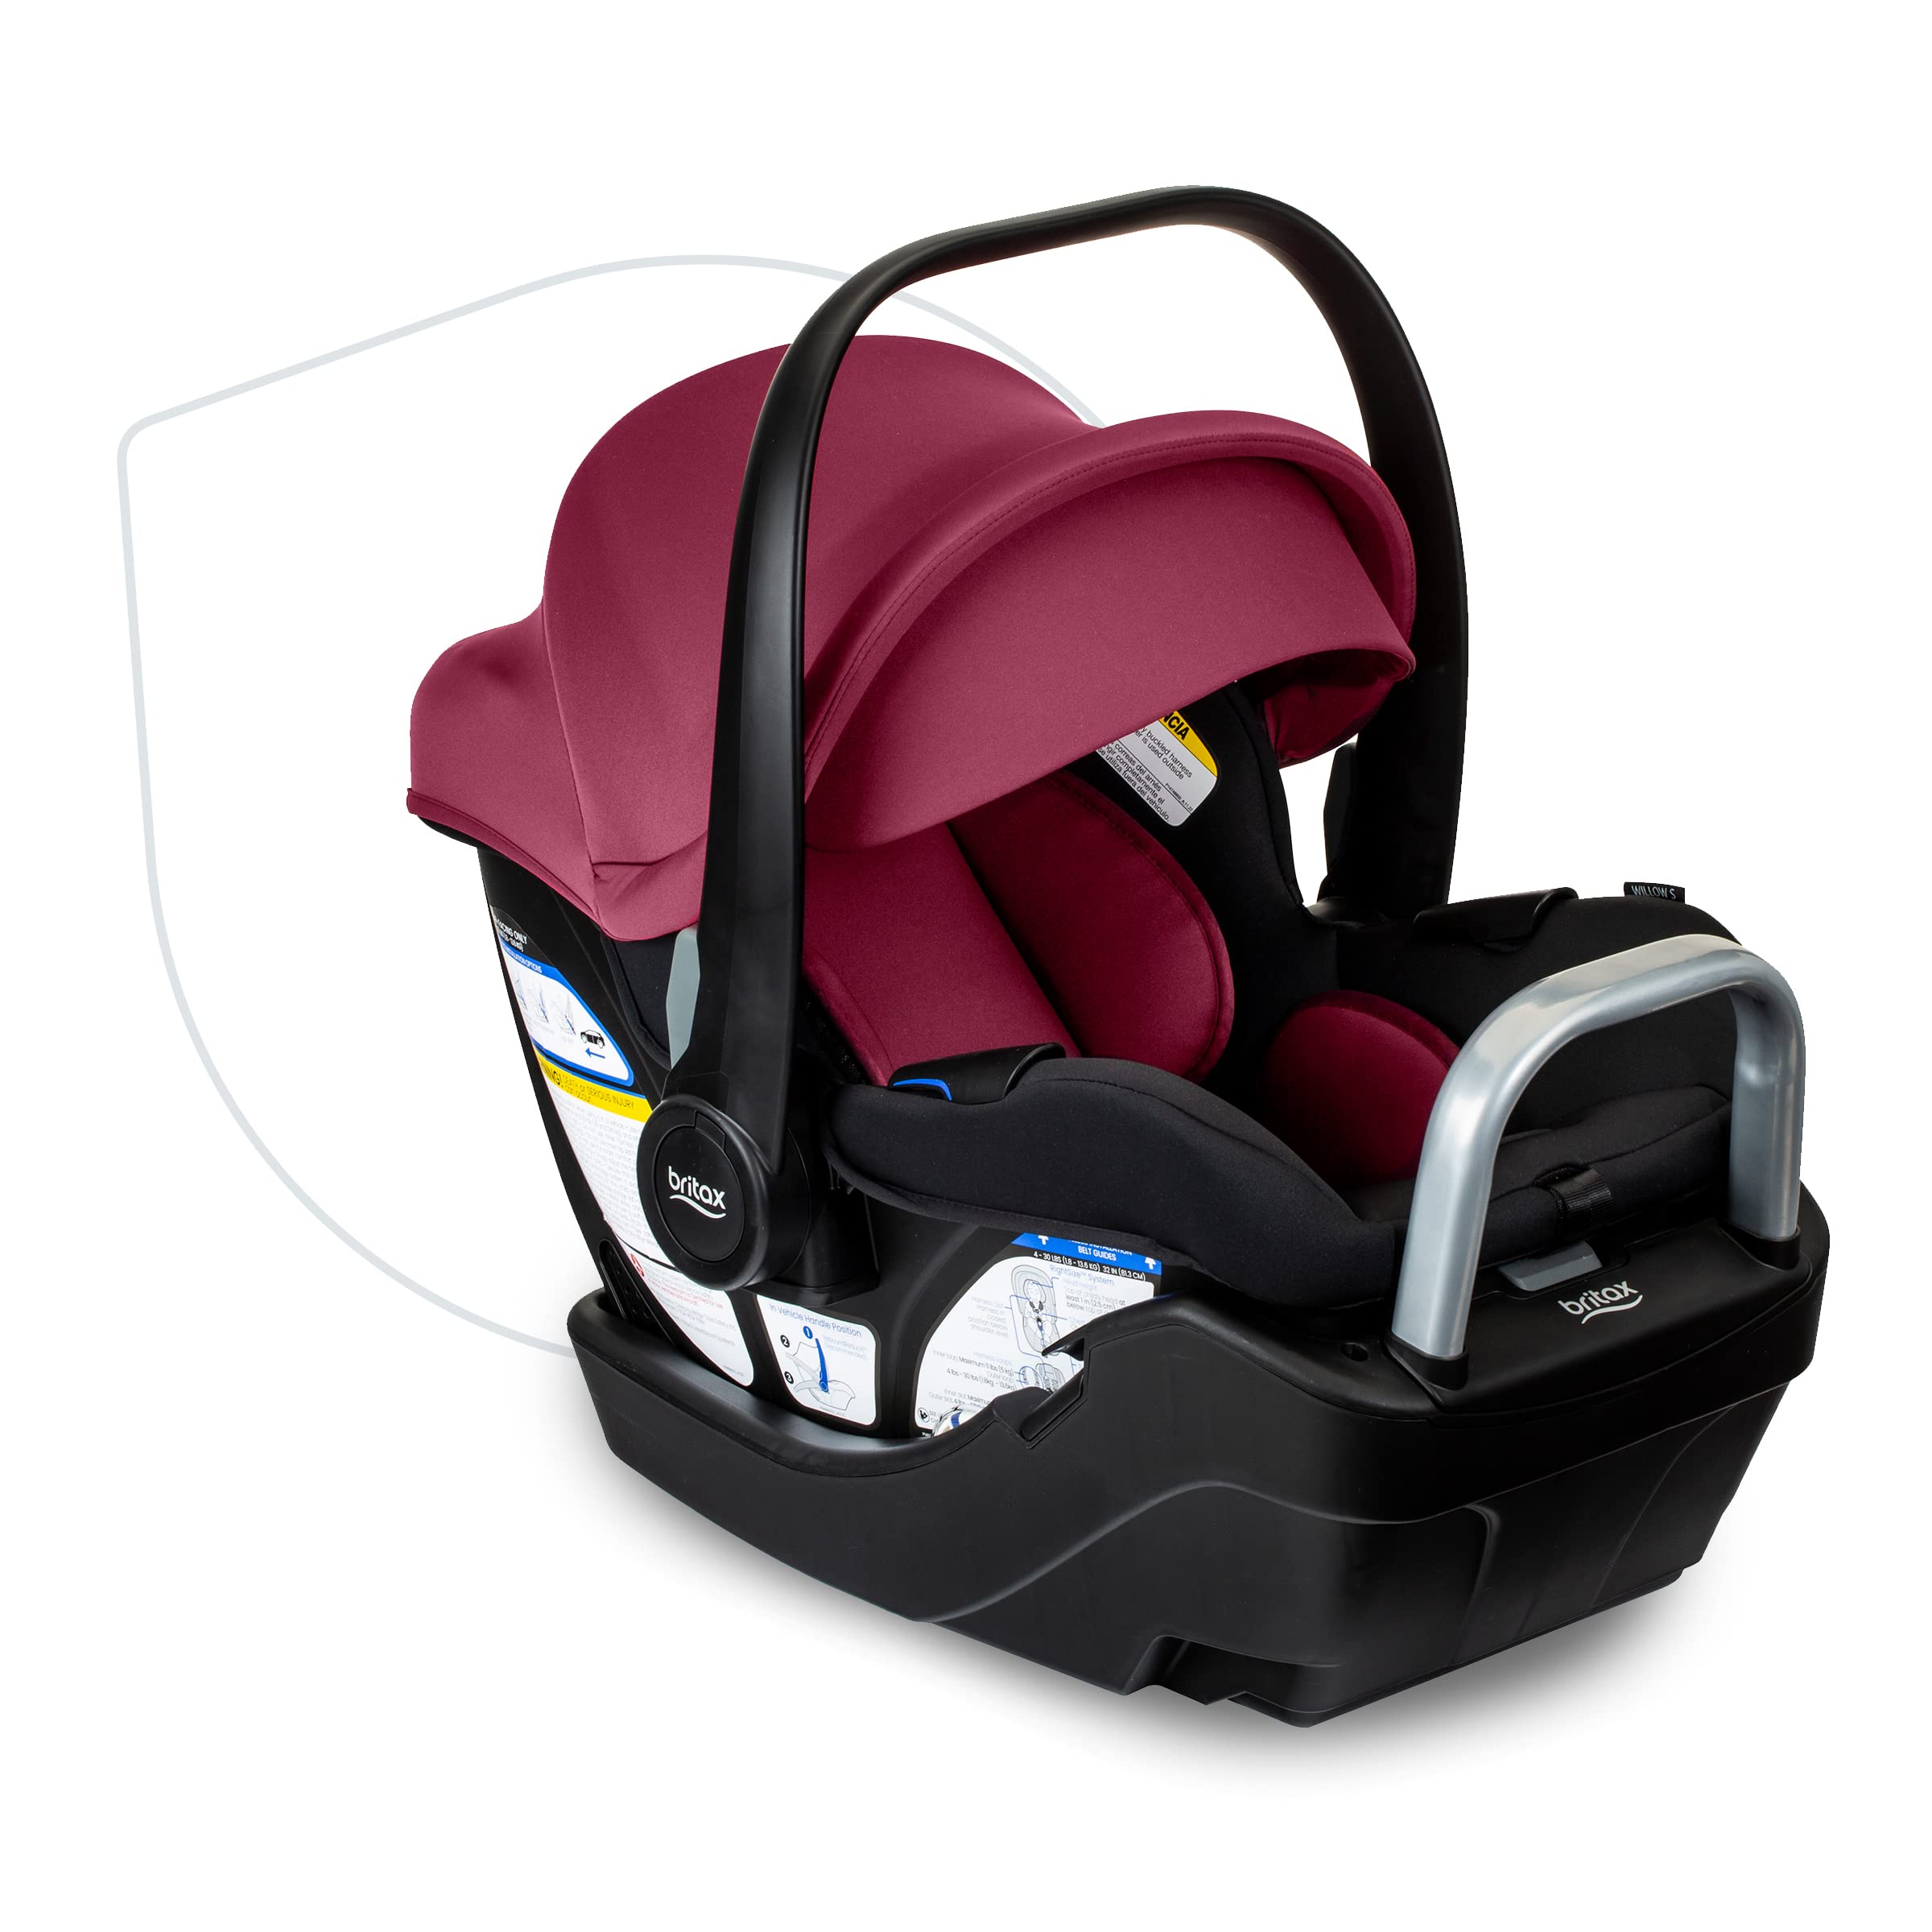 Britax Willow S Infant Car Seat with Alpine Base, ClickTight Technology, Rear Facing Car Seat with RightSize System, Ruby Onyx